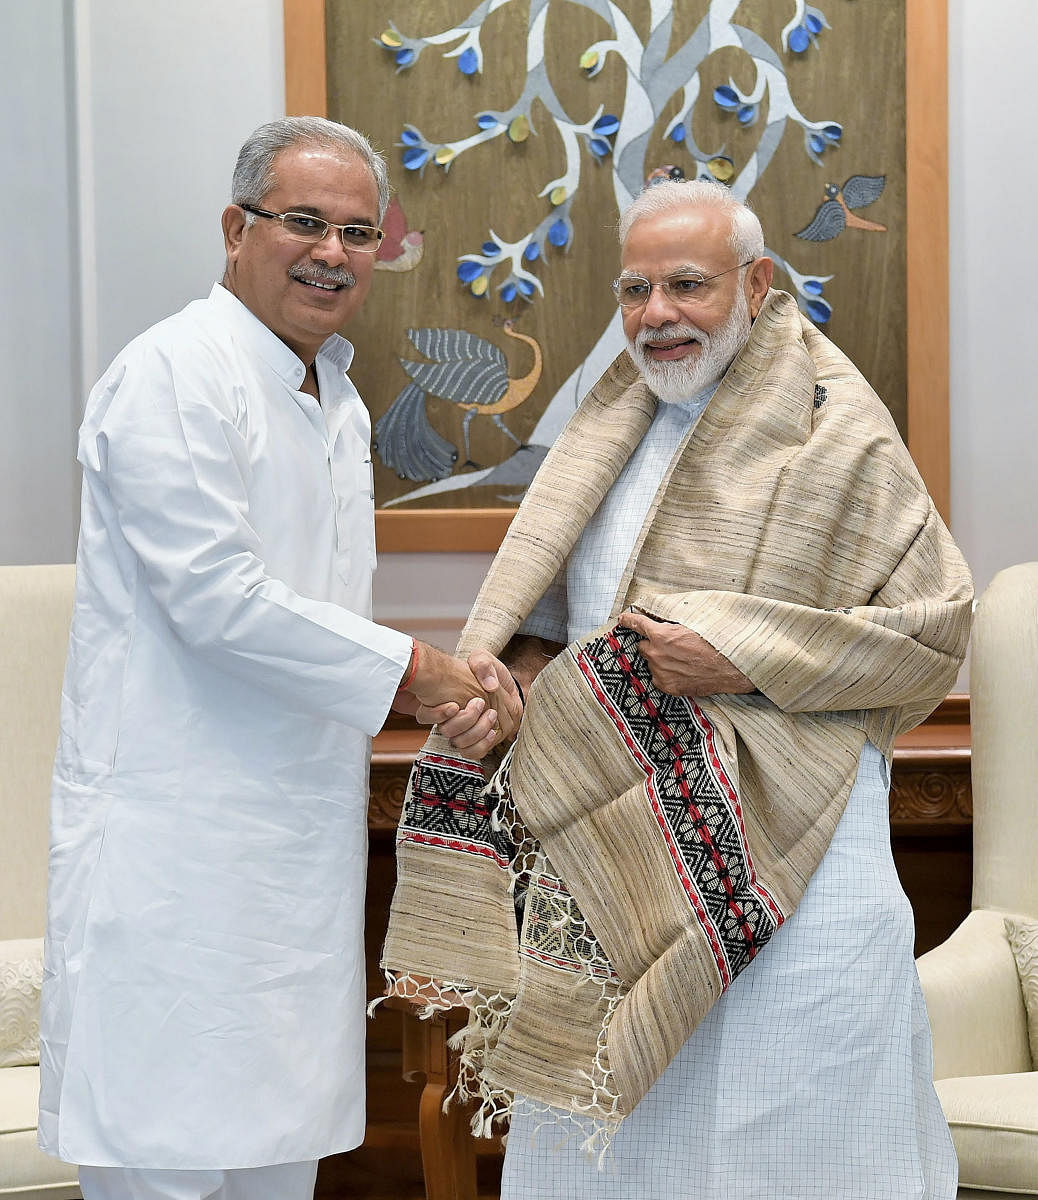 Prime Minister Narendra Modi being greeted by Chief Minister of Chhattisgarh Bhupesh Baghel during a meeting, New Delhi, Saturday, June 15, 2019. (PTI Photo)